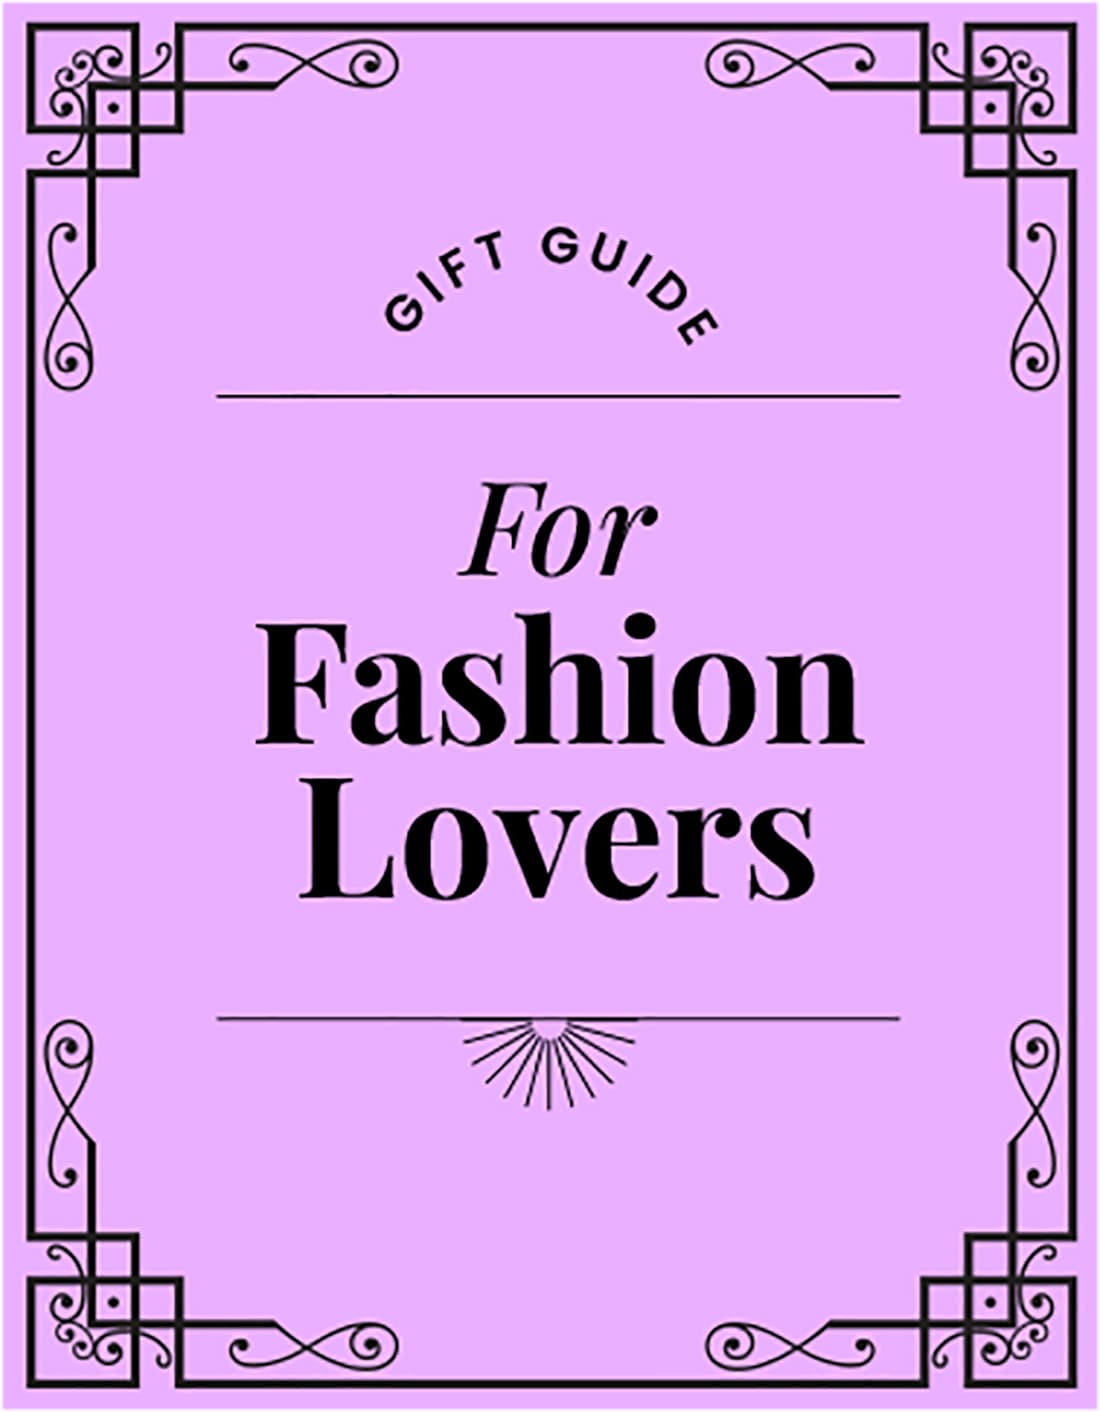 Gift Guide. For Fashion Lovers.